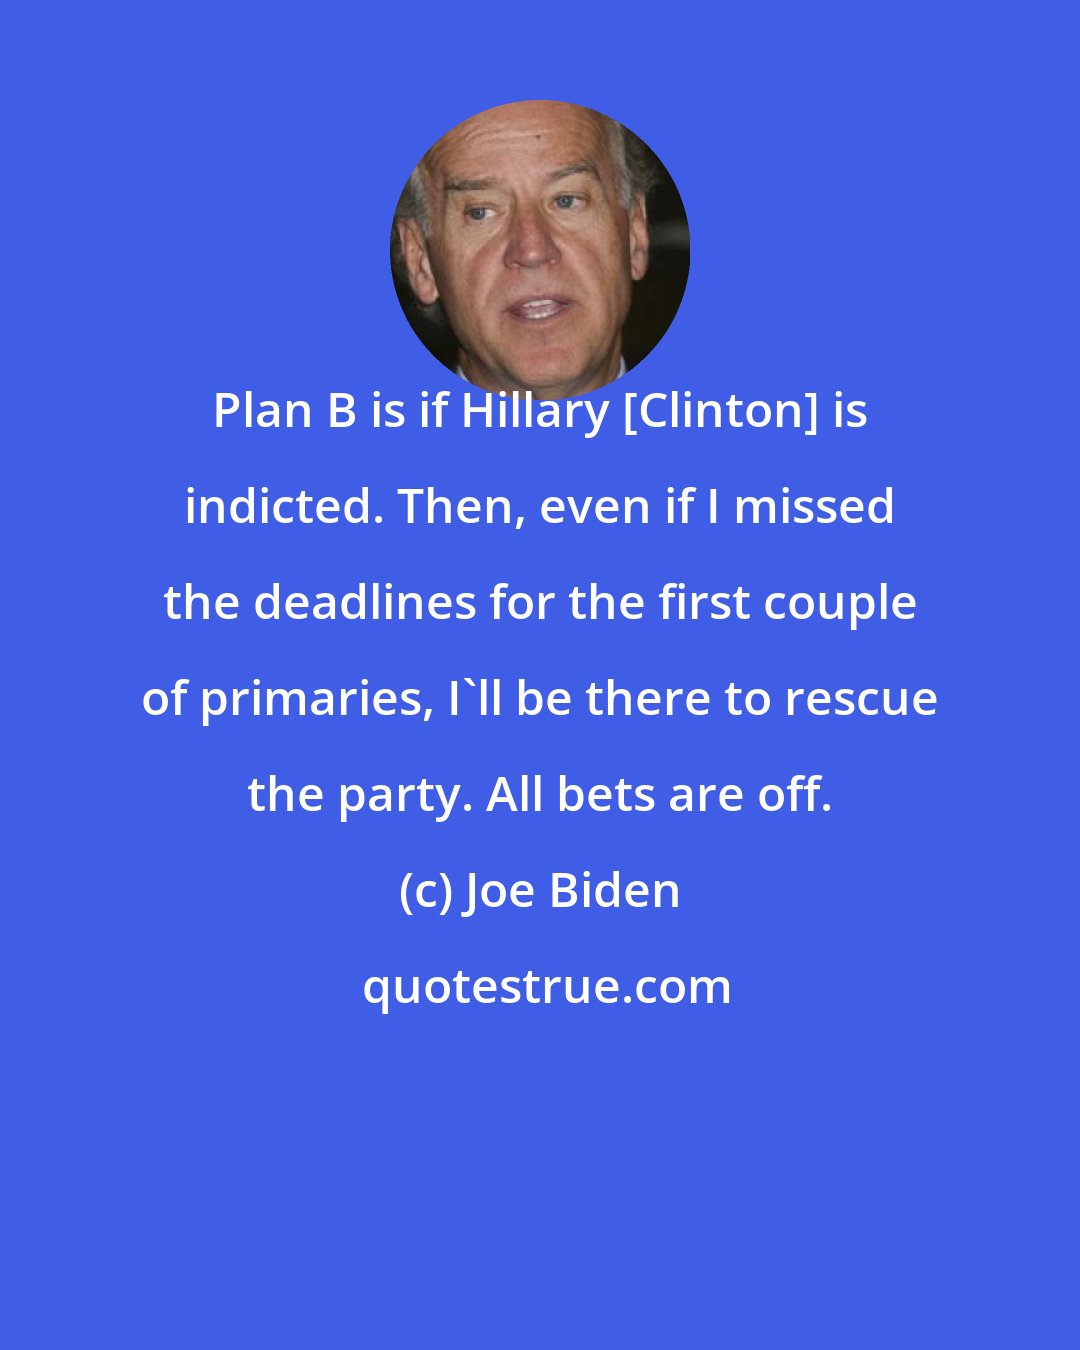 Joe Biden: Plan B is if Hillary [Clinton] is indicted. Then, even if I missed the deadlines for the first couple of primaries, I'll be there to rescue the party. All bets are off.